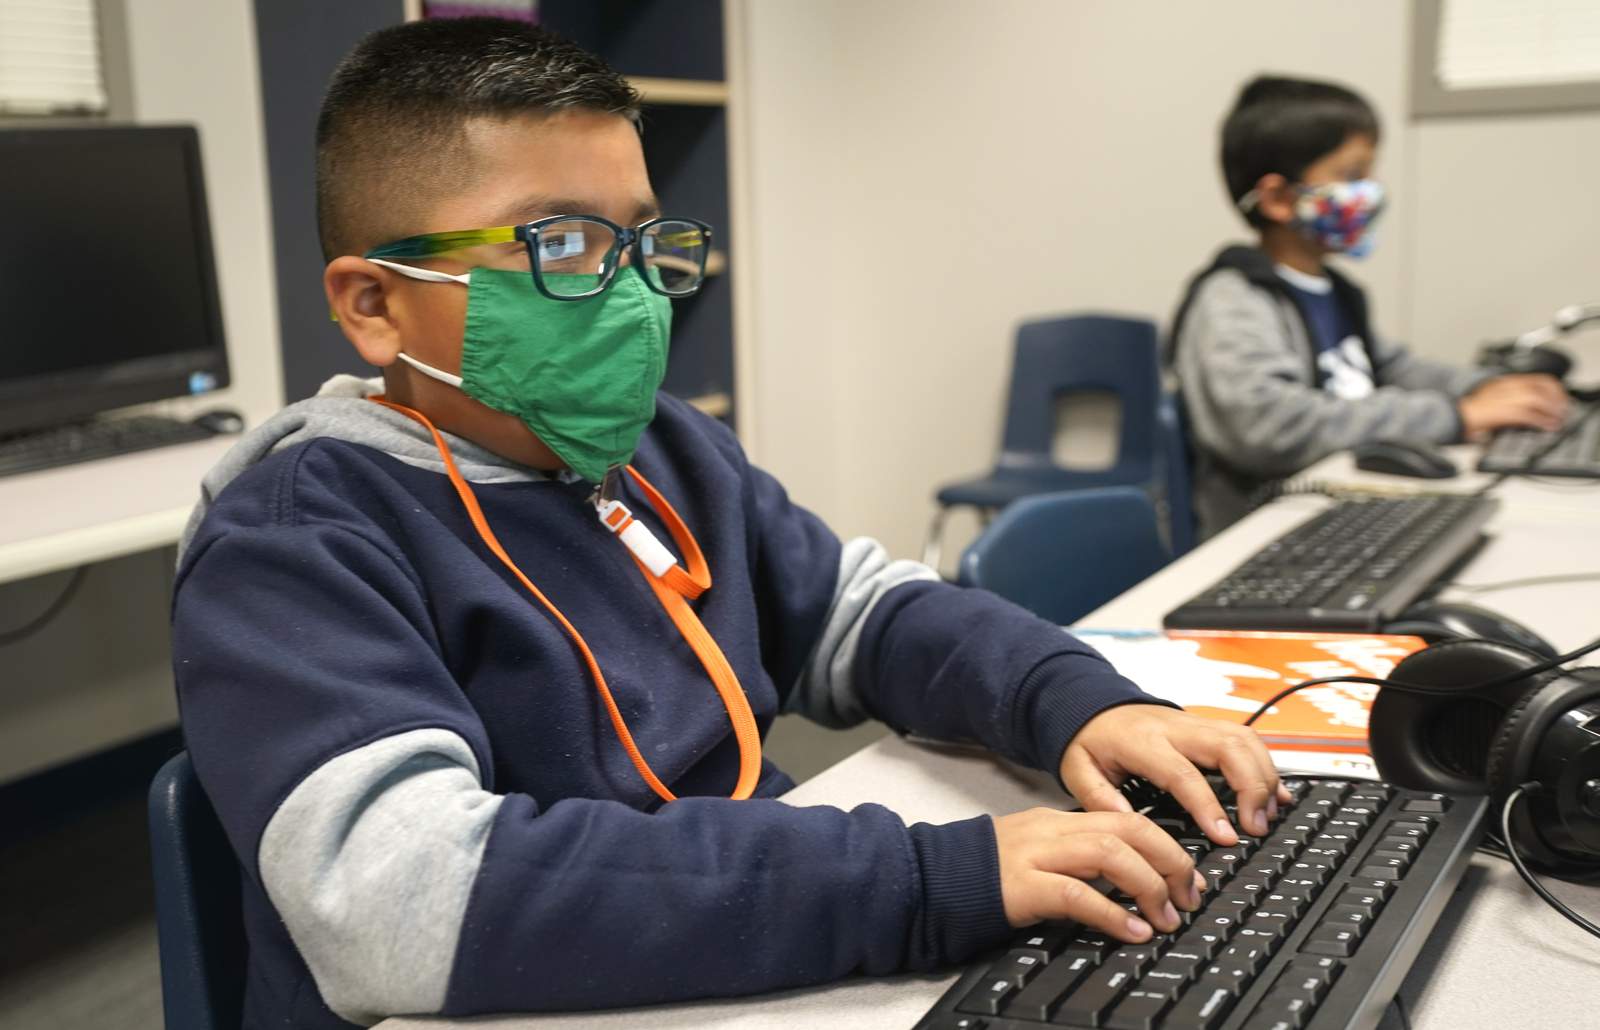 Study finds Texas is one of the worst states for children during the pandemic